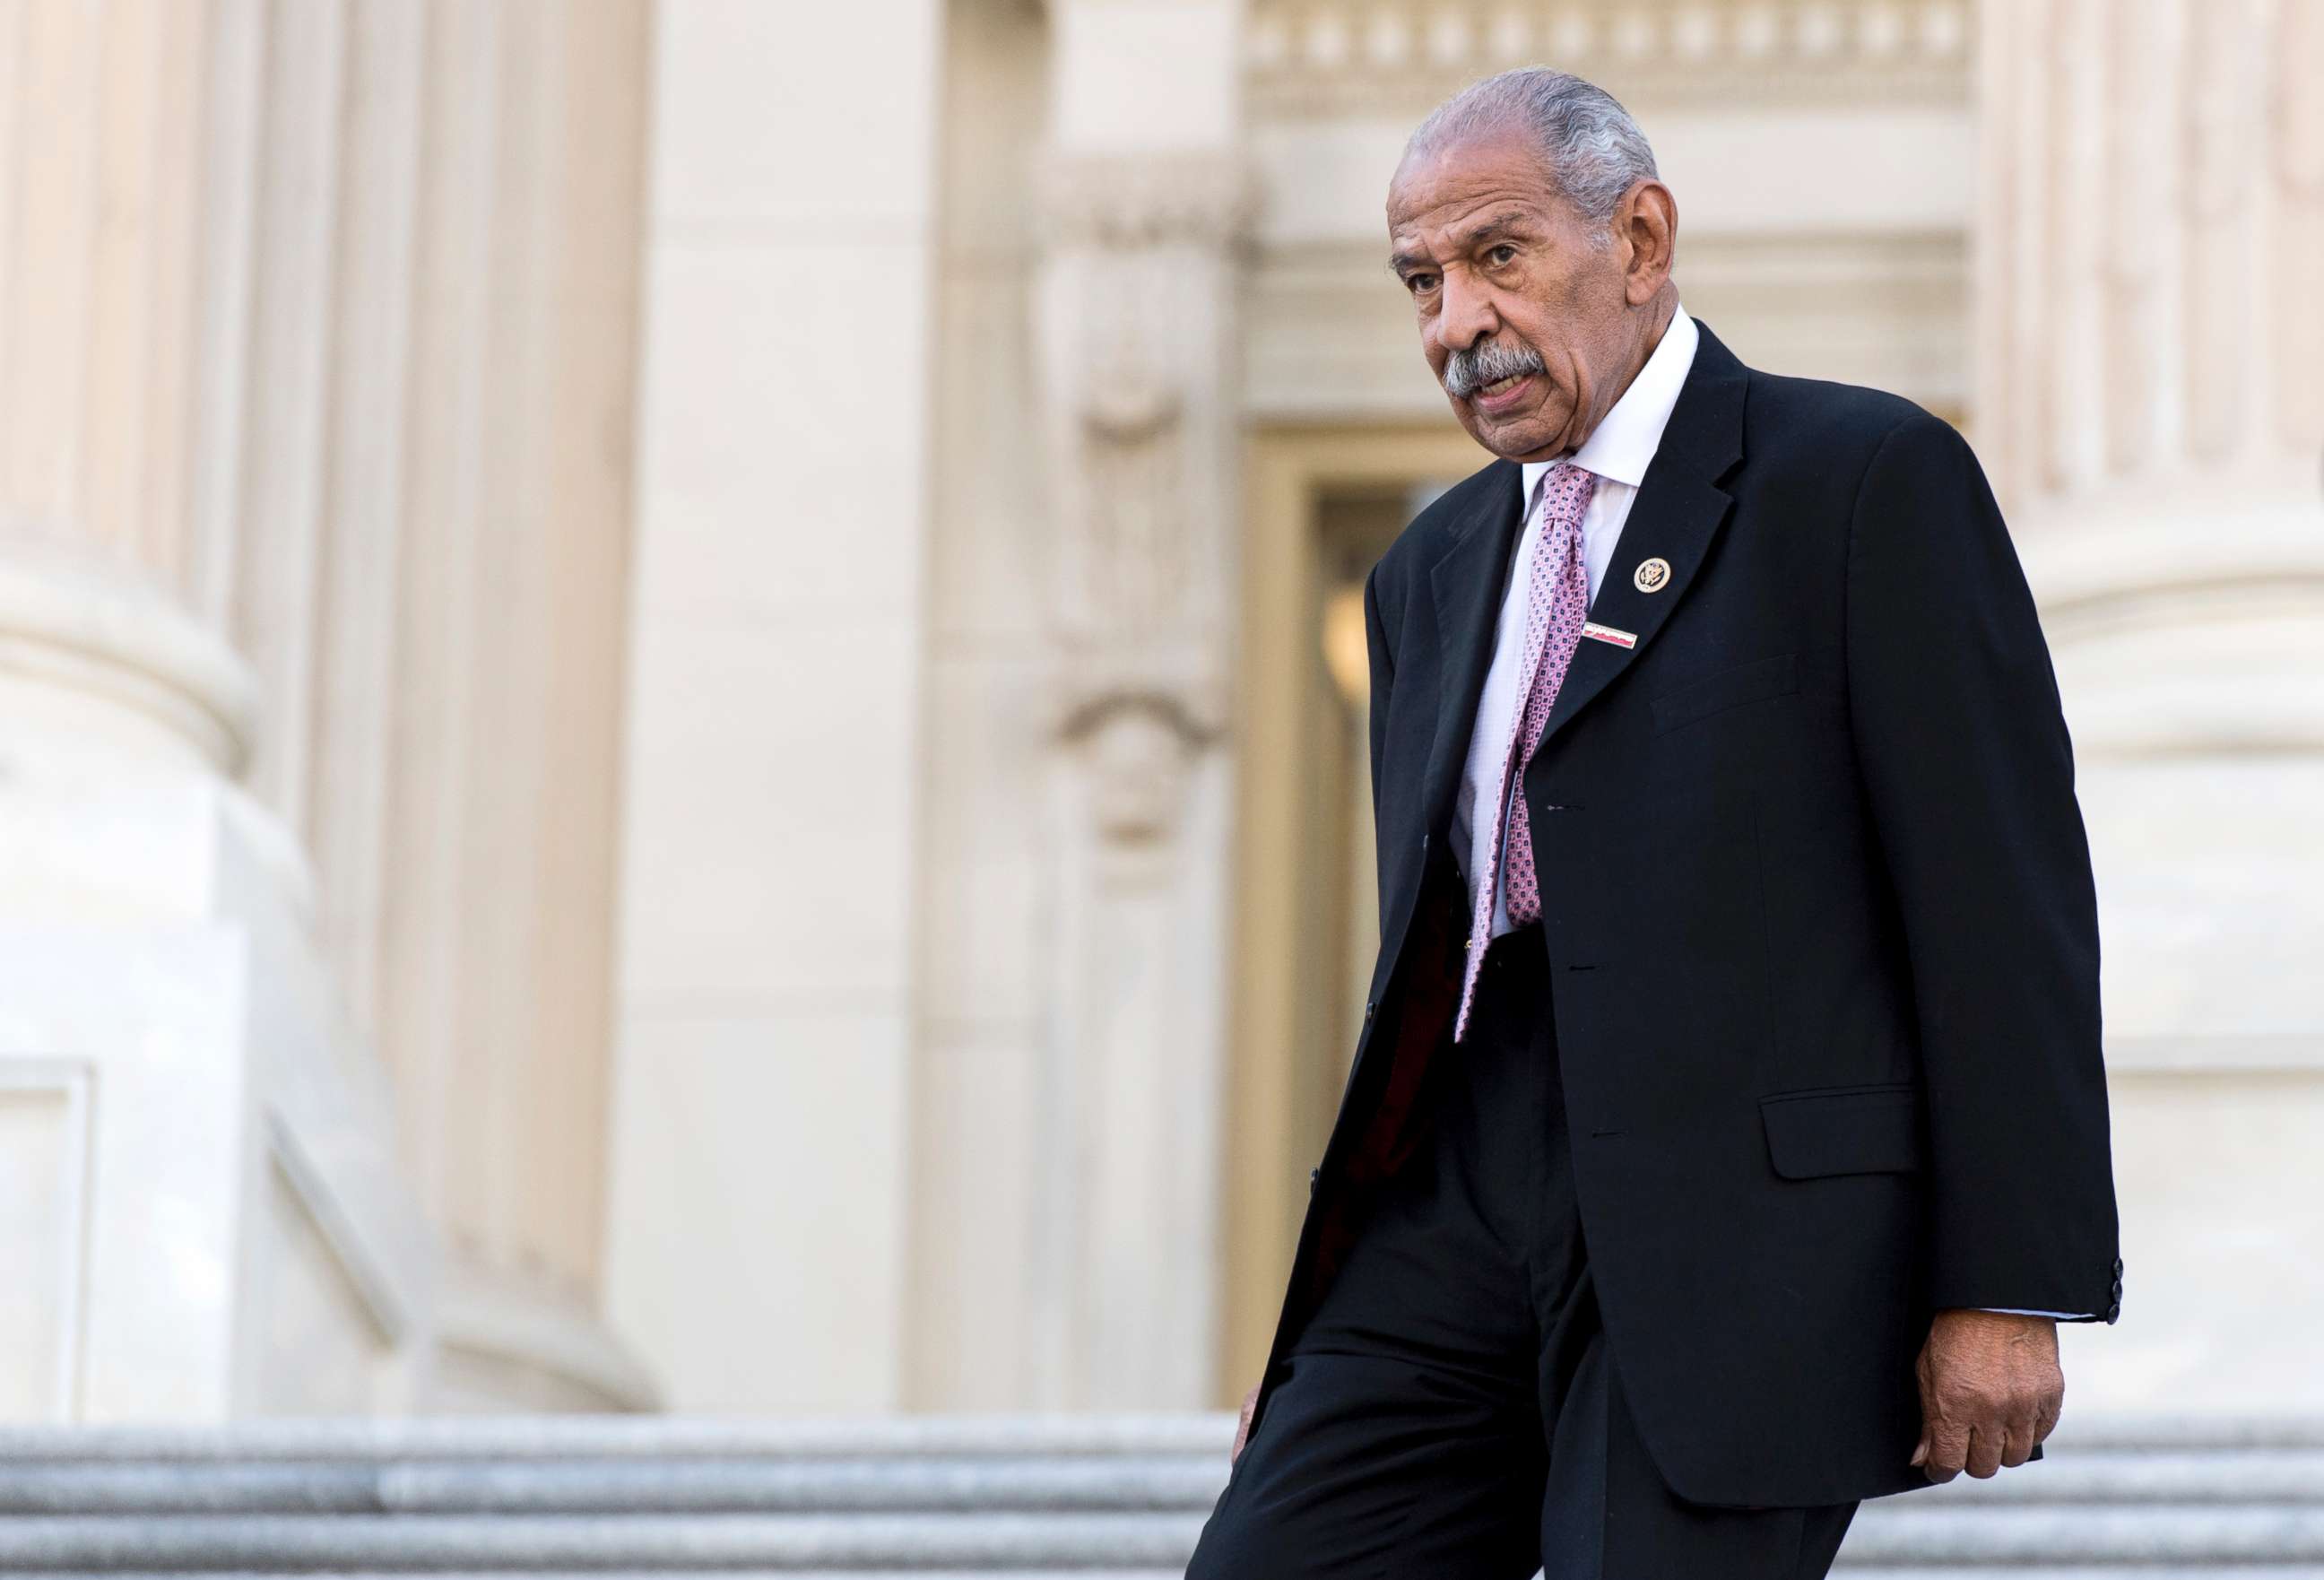 PHOTO: Rep. John Conyers walks down the House steps after a vote in the Capitol, Sept. 27, 2016.